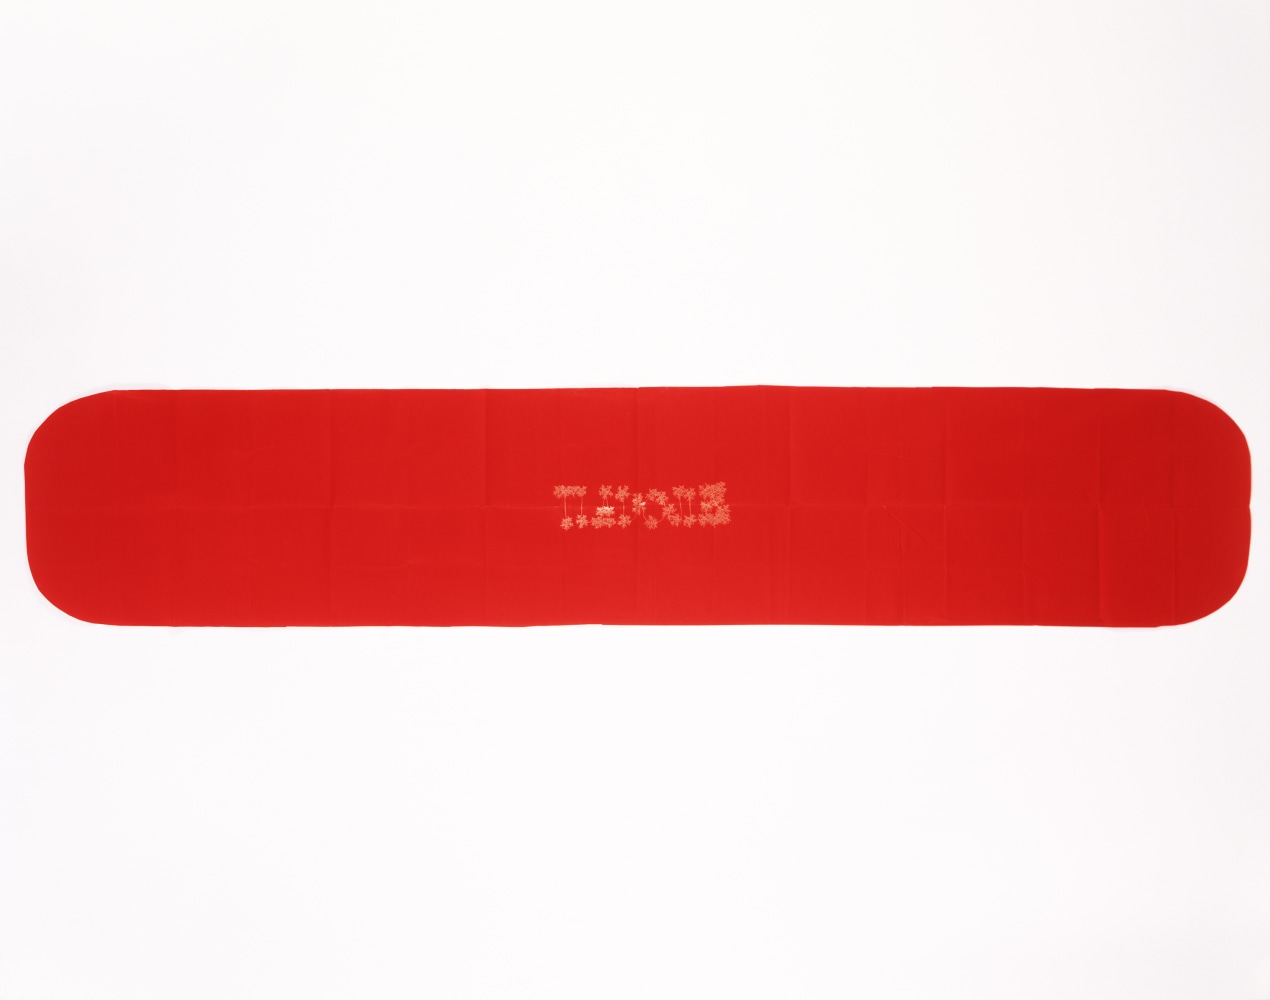 James Lee Byars

&amp;ldquo;TLADOJLB (The Life and Death of James Lee Byars)&amp;rdquo;, 1994

Gold pencil on red Japanese paper

15 1/4 x 78 3/4 inches

39 x 200 cm

JBZ 233

$100,000